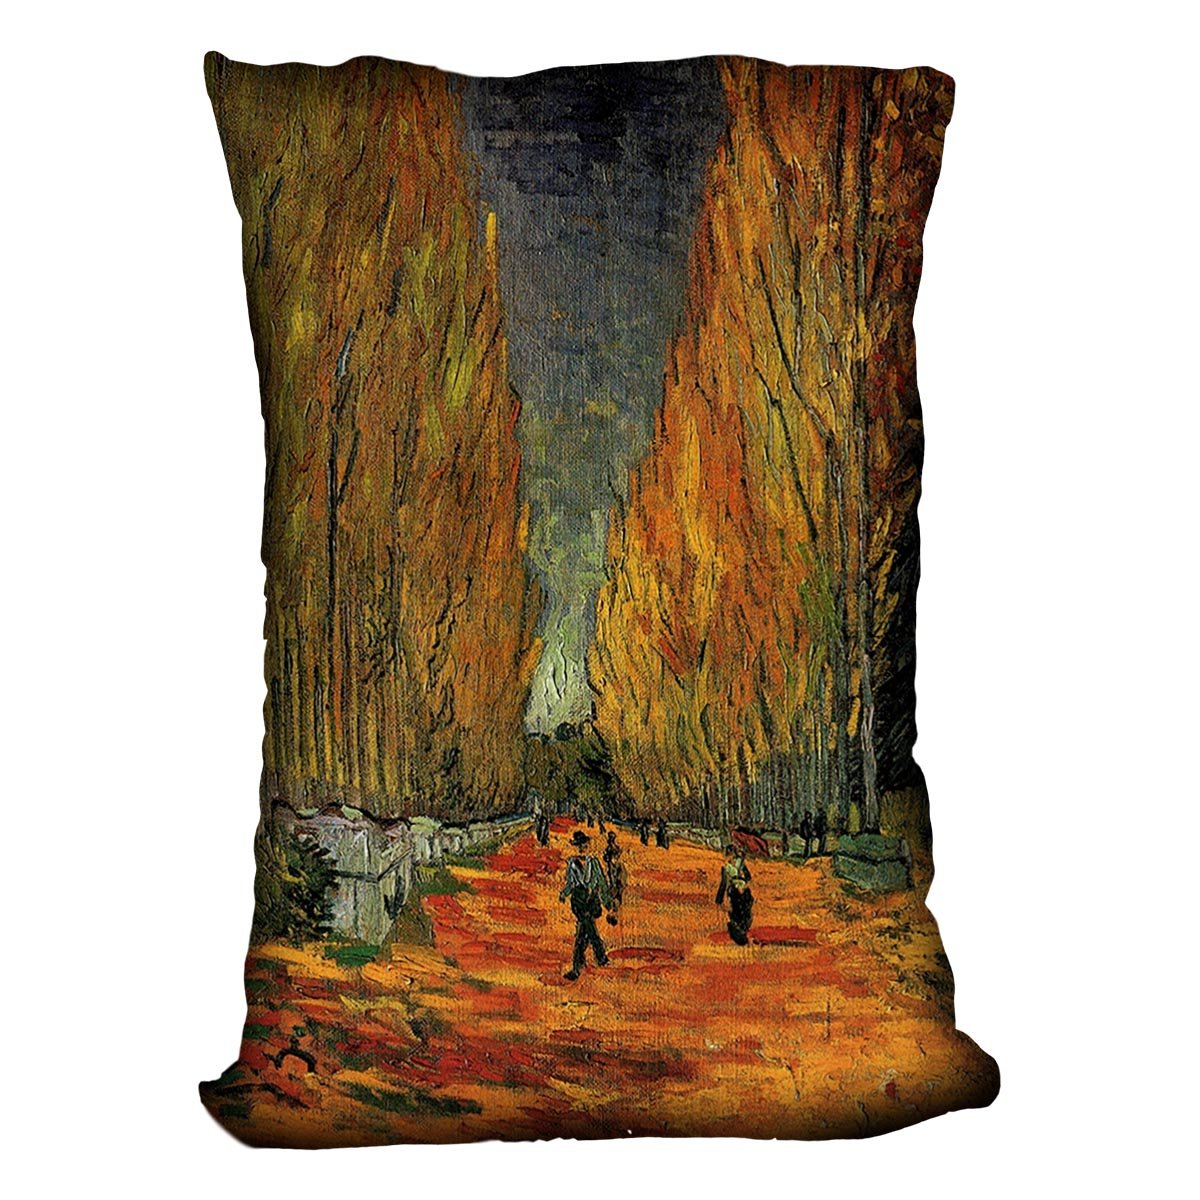 Les Alyscamps 3 by Van Gogh Throw Pillow